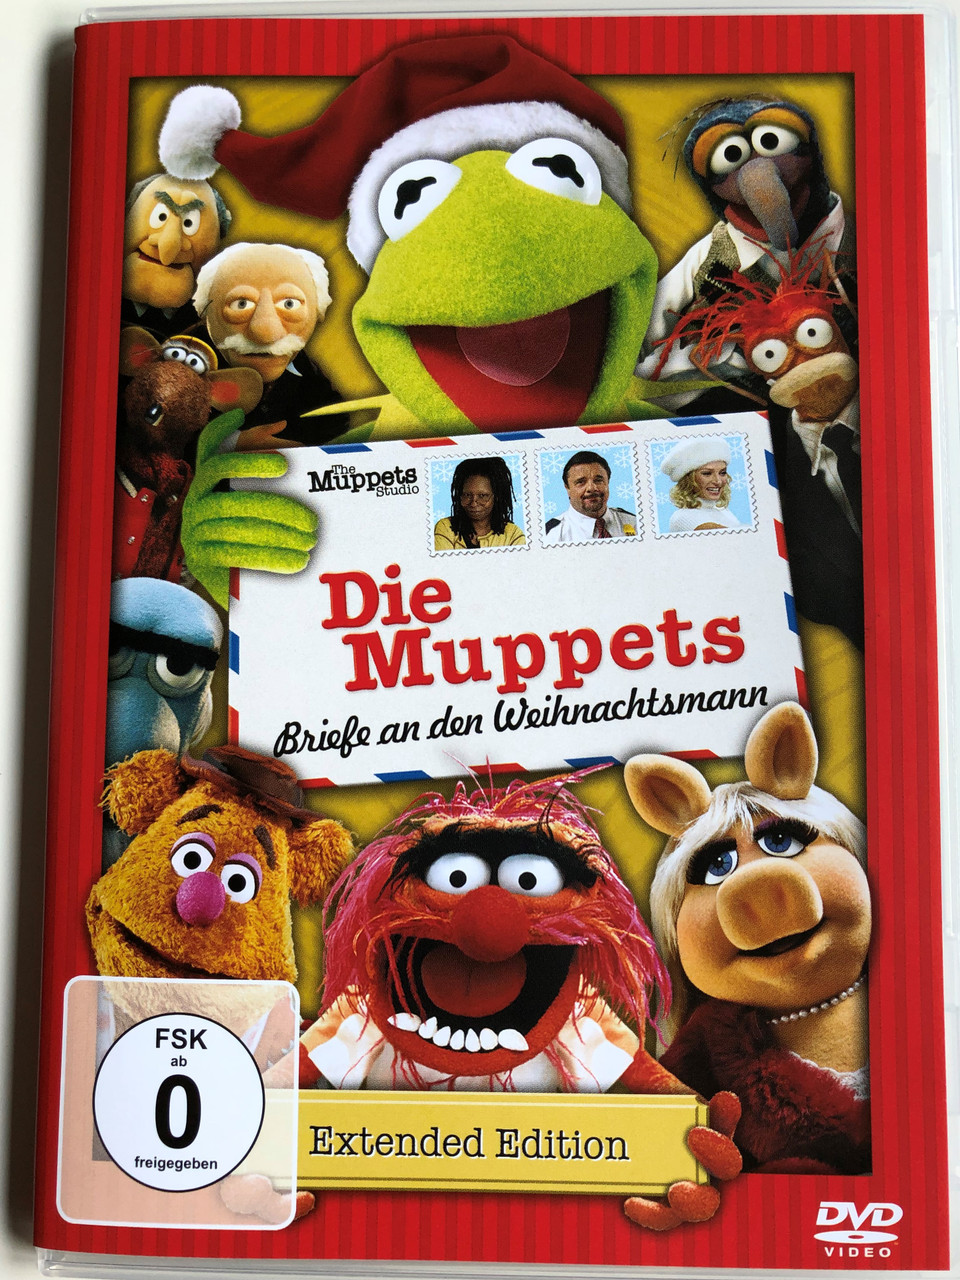 A muppets christmas: Letters to Santa DVD 2008 Die Muppets - Briefe an den  Weihnachtsmann / Directed by Kirk R. Thatcher / Voices: Steve Whitmire,  Dave Goelz, Bill Barretta, Eric Jacobson /